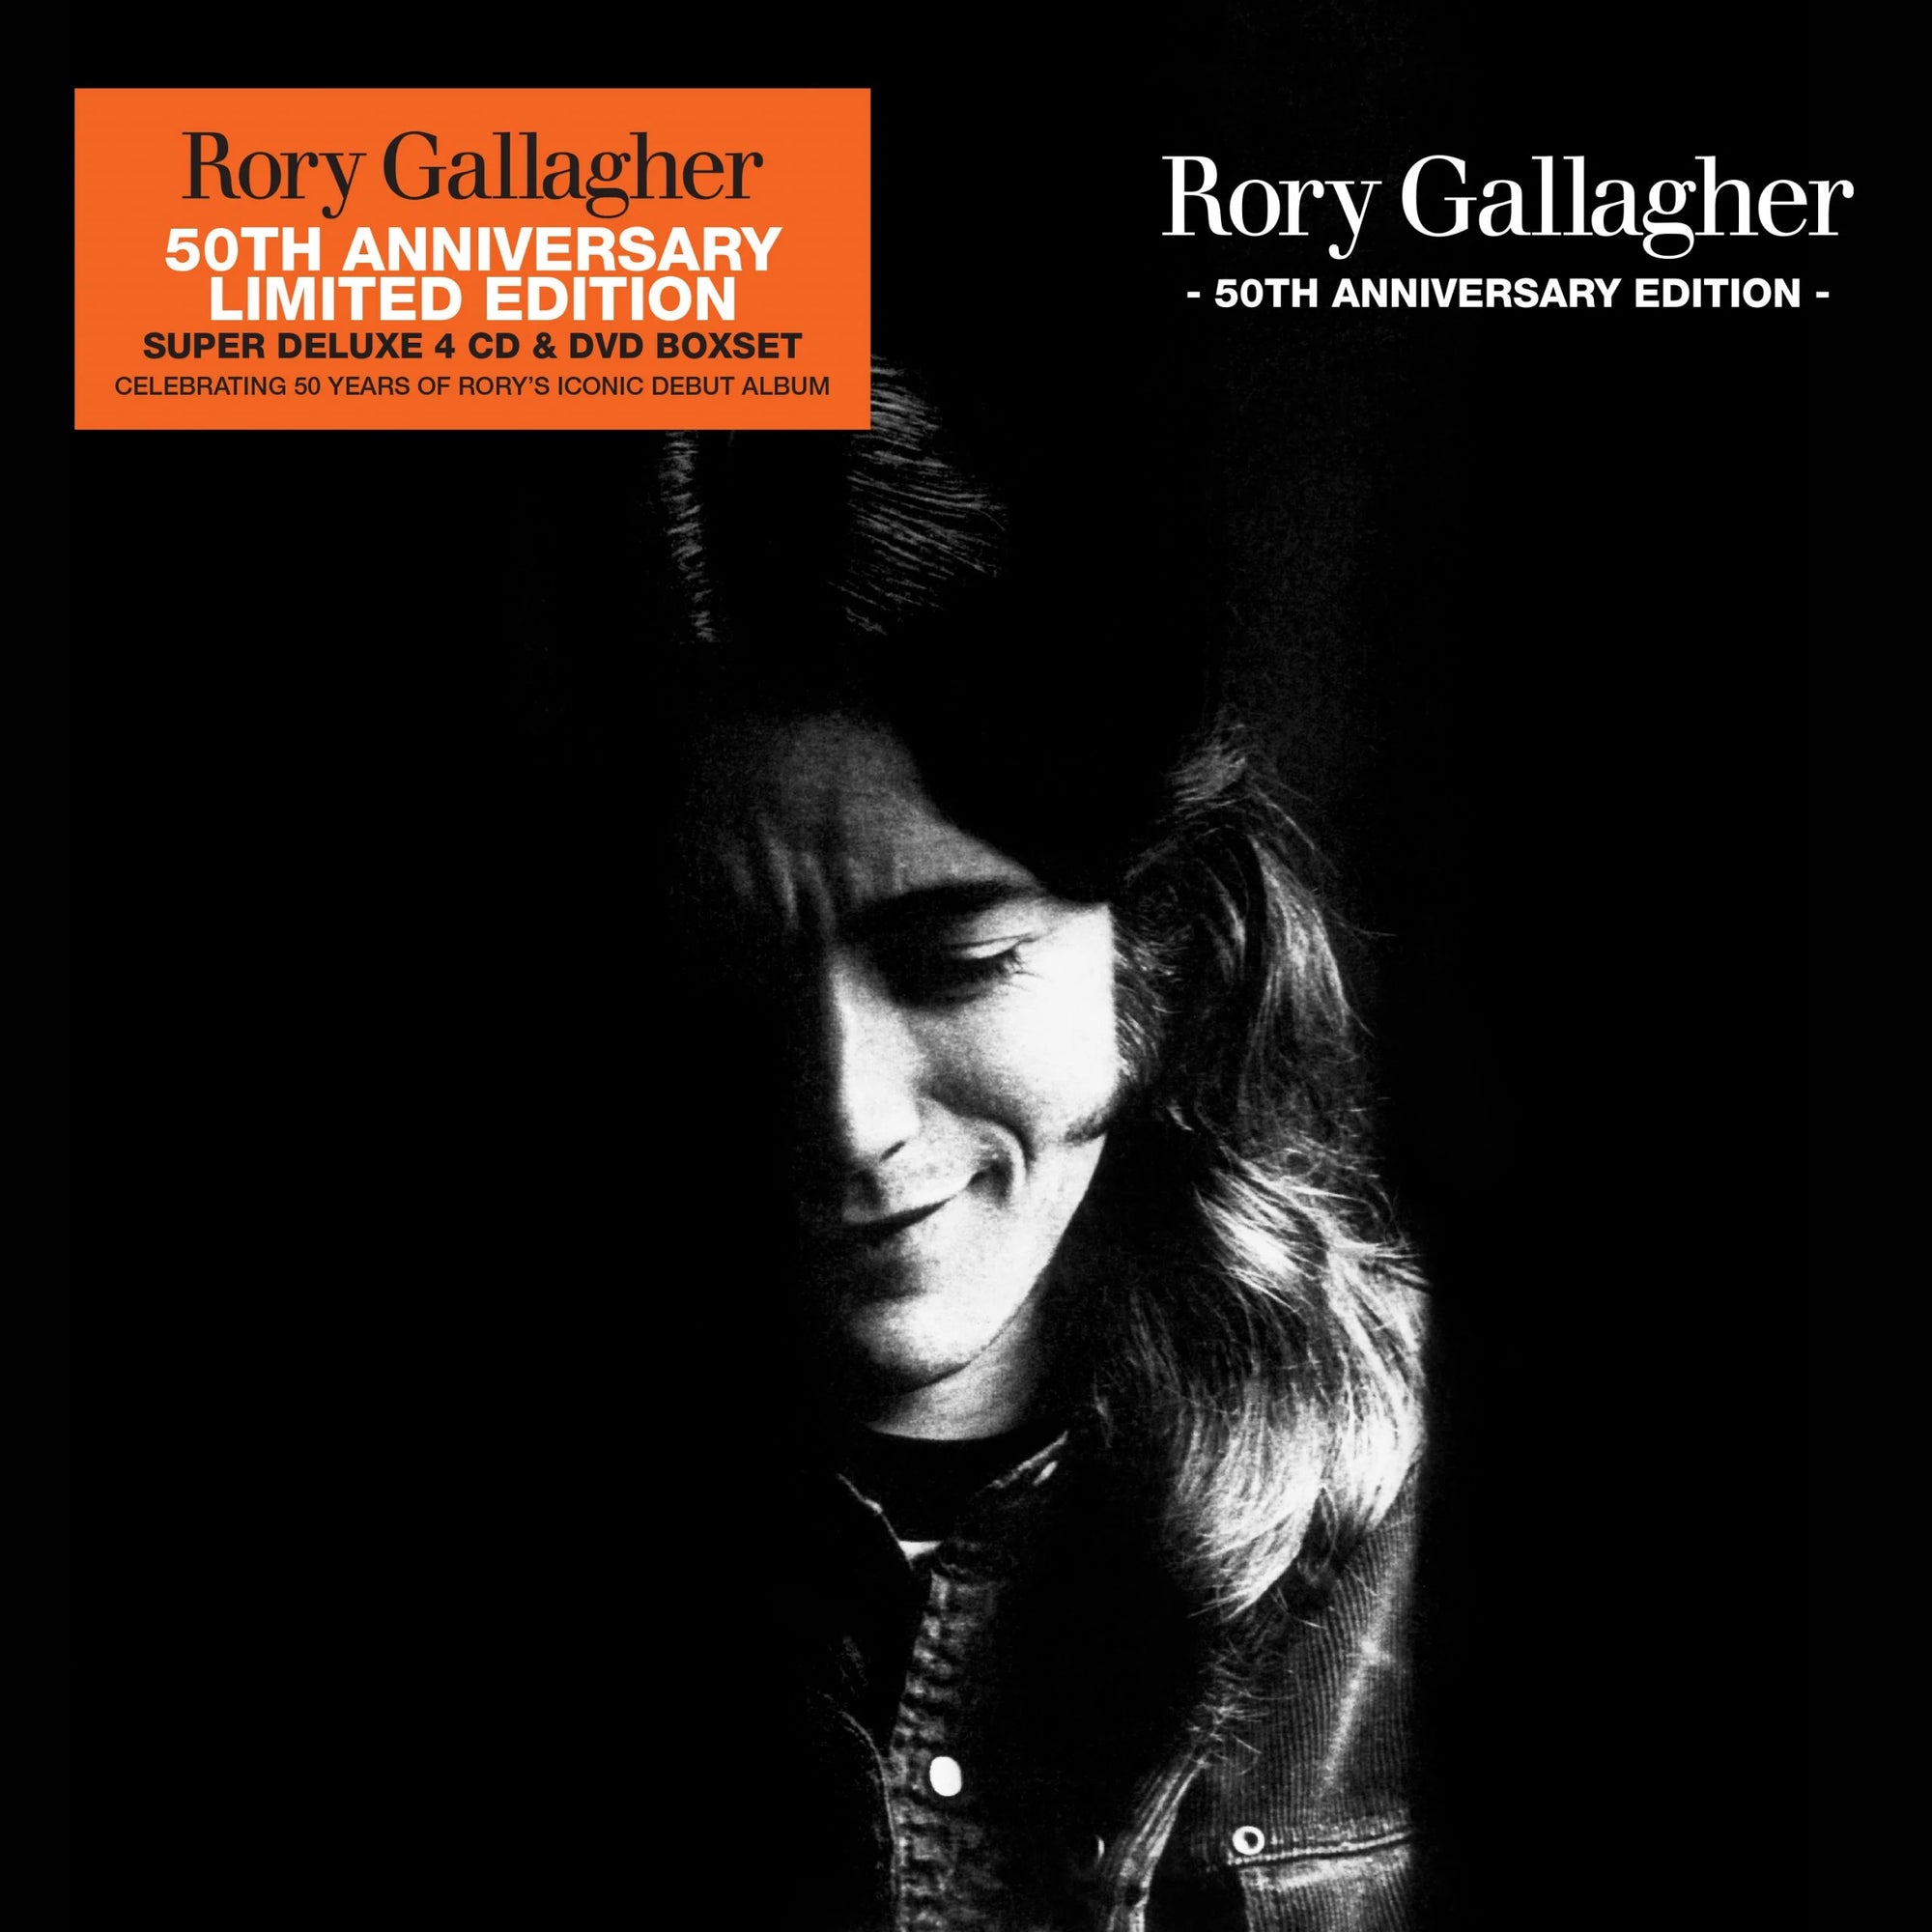 Rory Gallagher - Rory Gallagher (Vinyl 3LP)